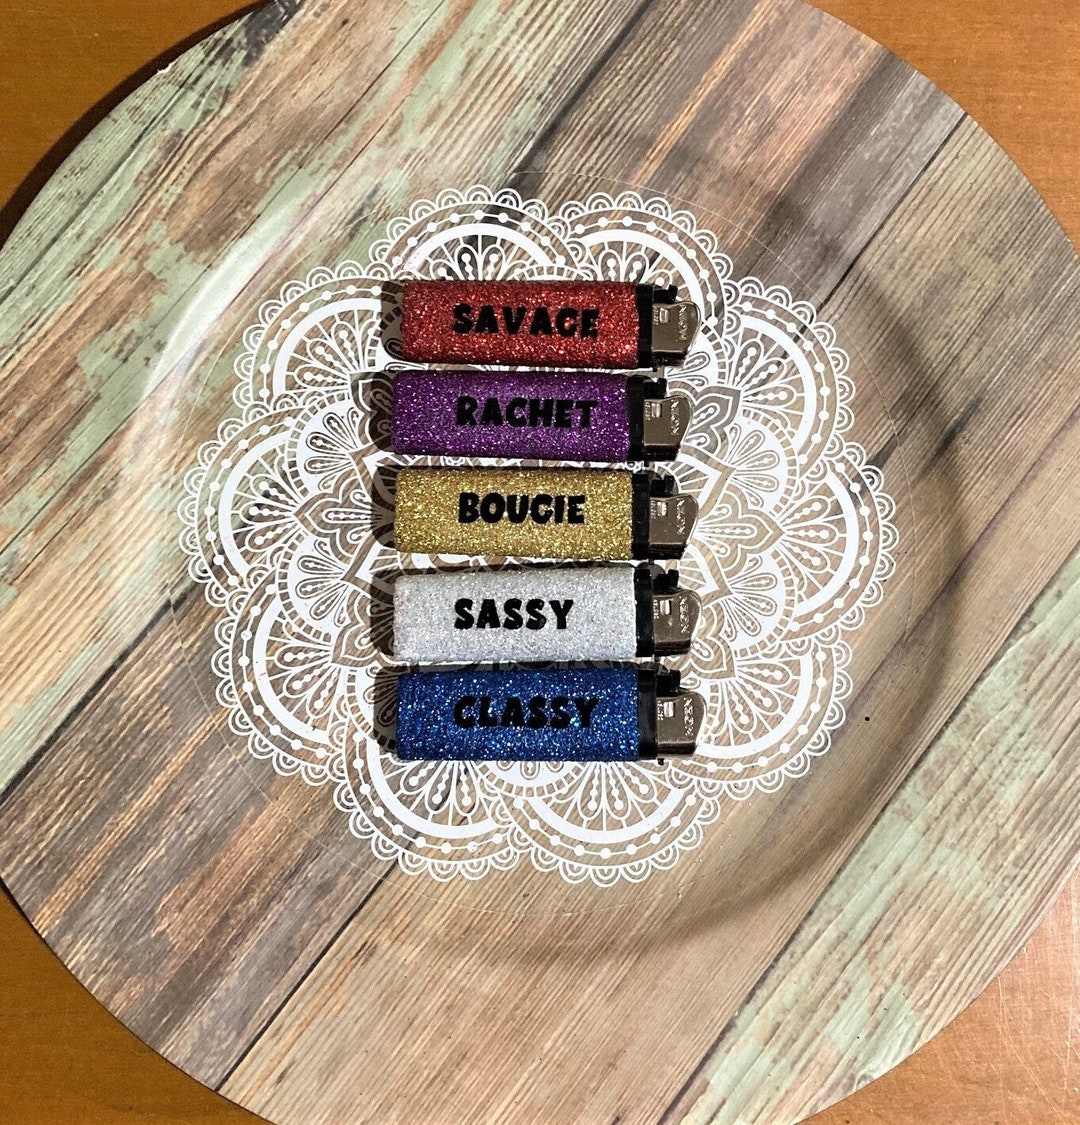 Sassy Classy Bougie Rachet Savage Decorated Lighters With Etsy